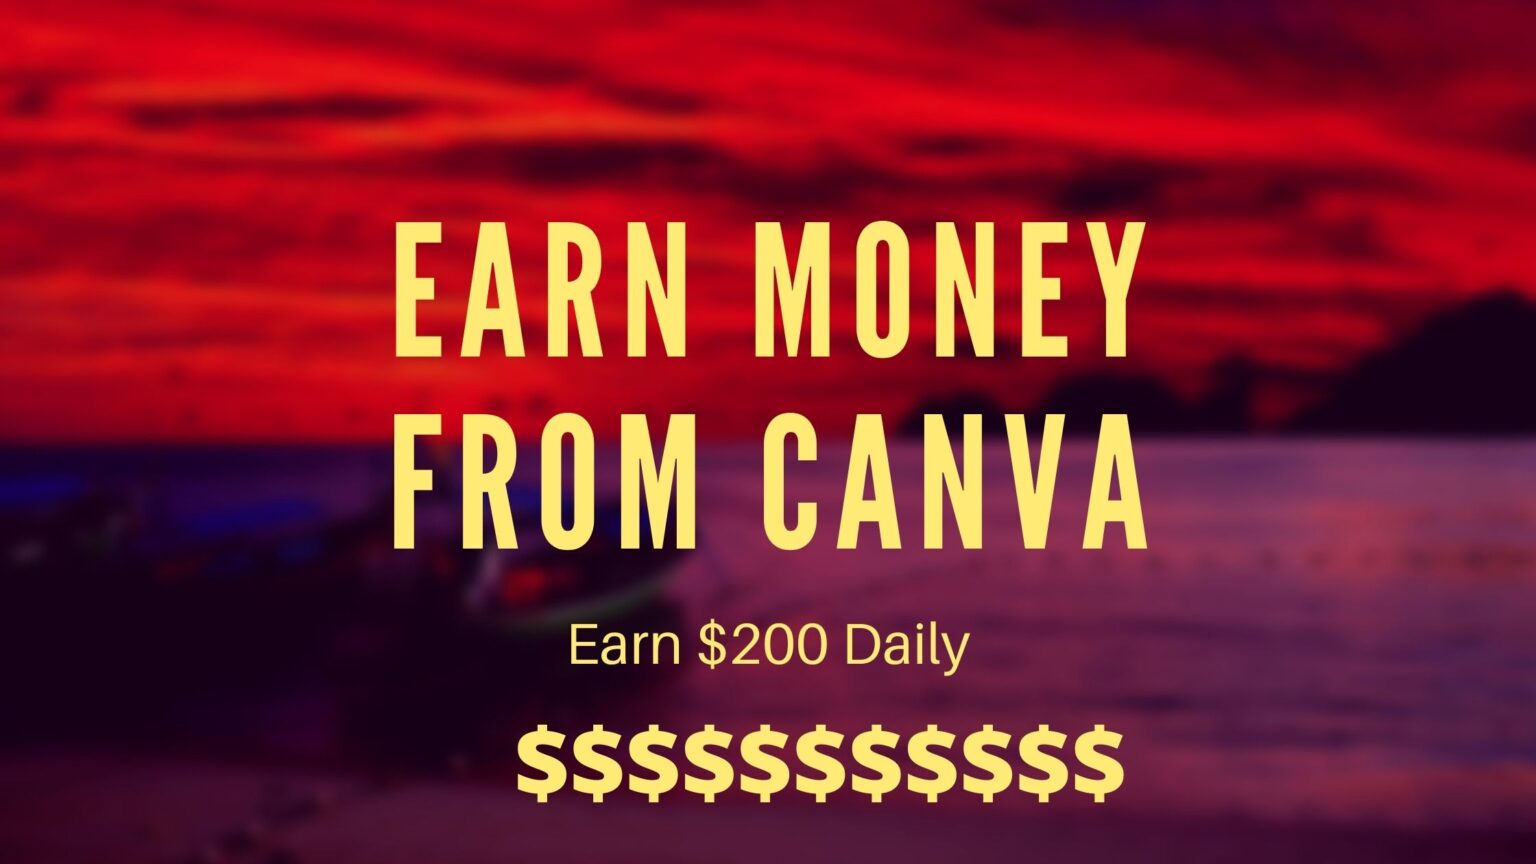 How to make money from canva | How to earn money with canva